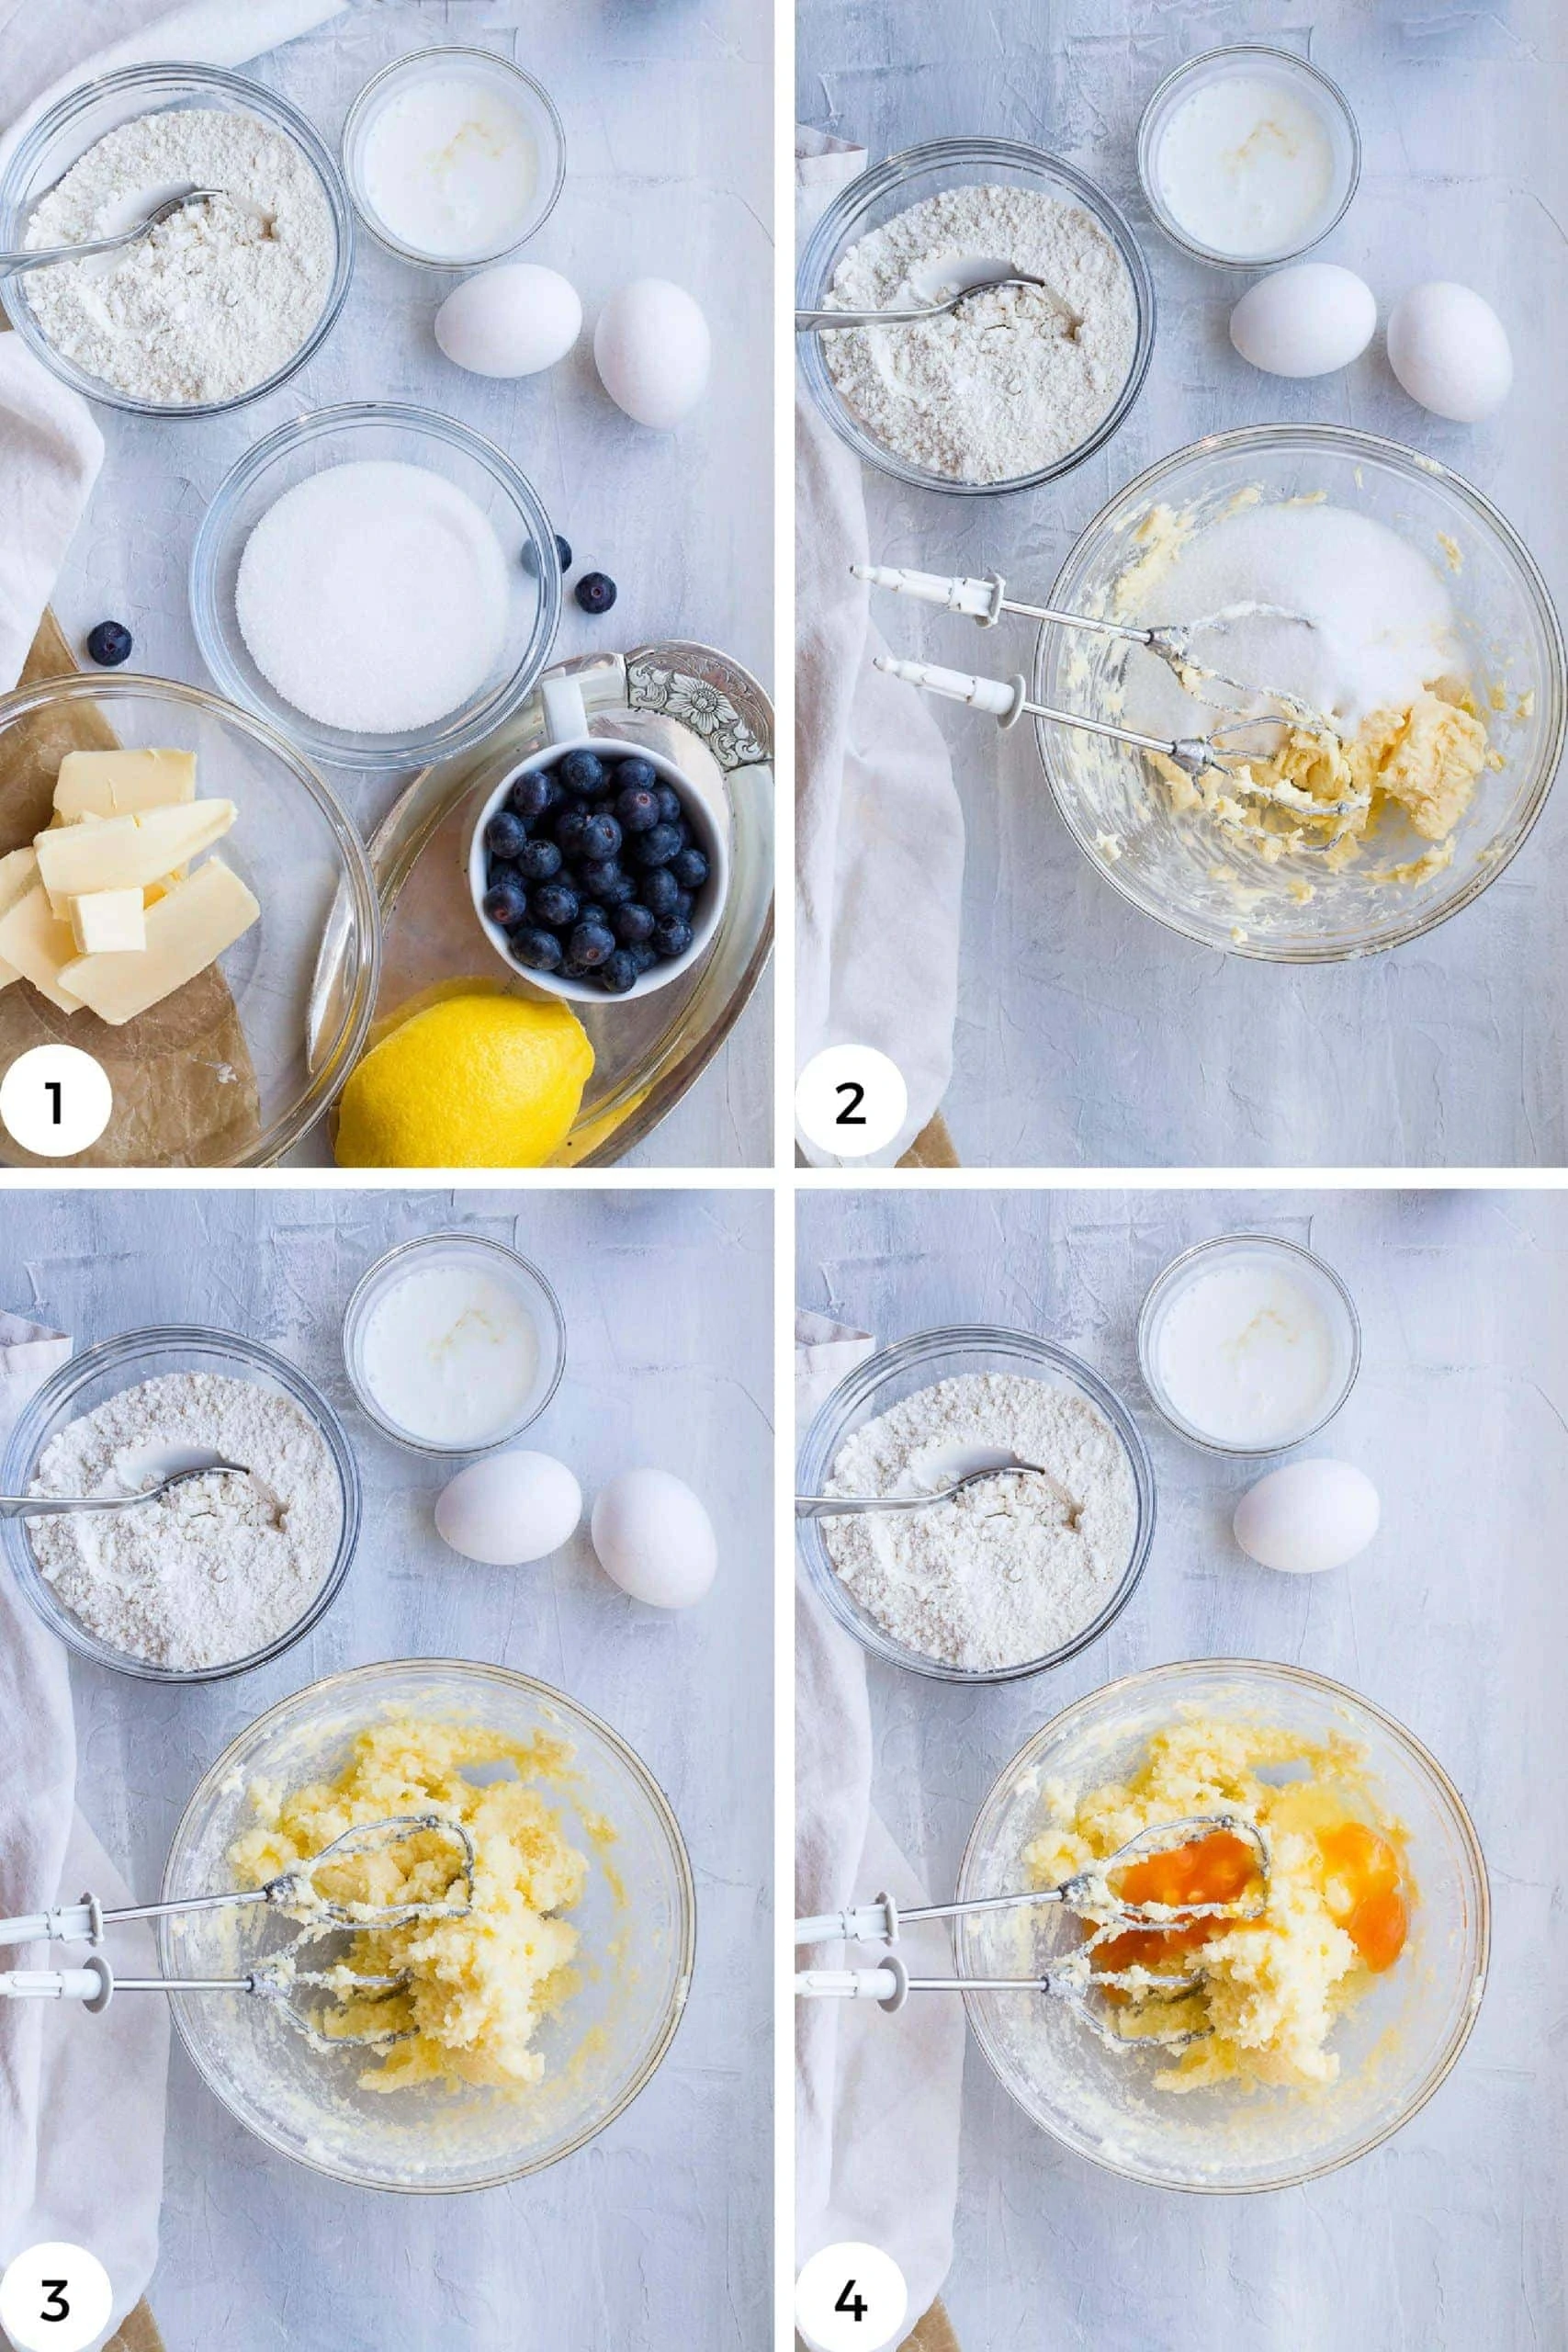 4 first steps to make this lemon blueberry cake.